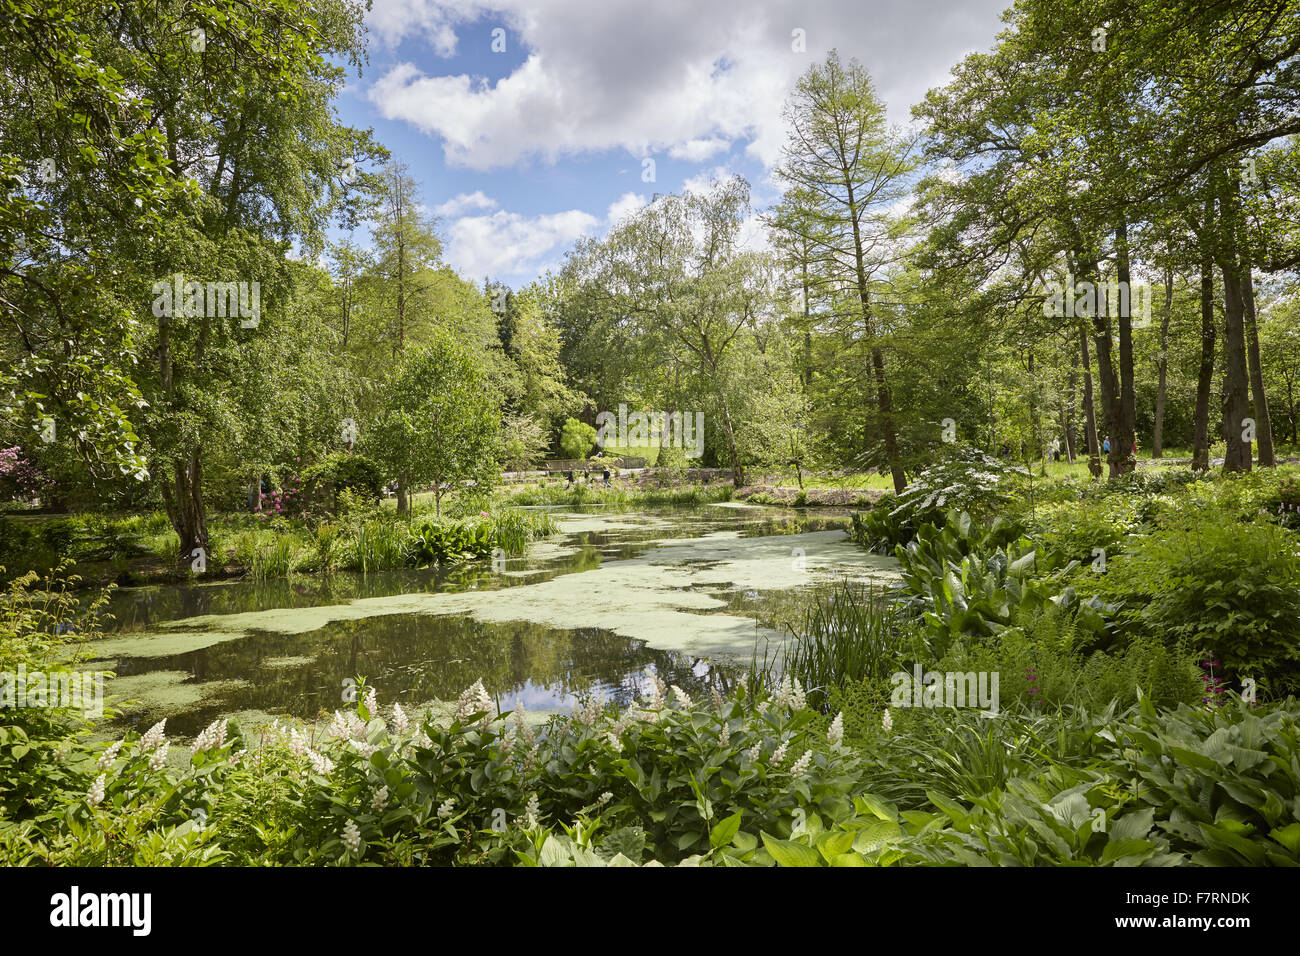 Bodnant Garden, Clwyd, Wales. Bodnant is a breathtaking garden with grand terraces and views of Snowdonia. Stock Photo